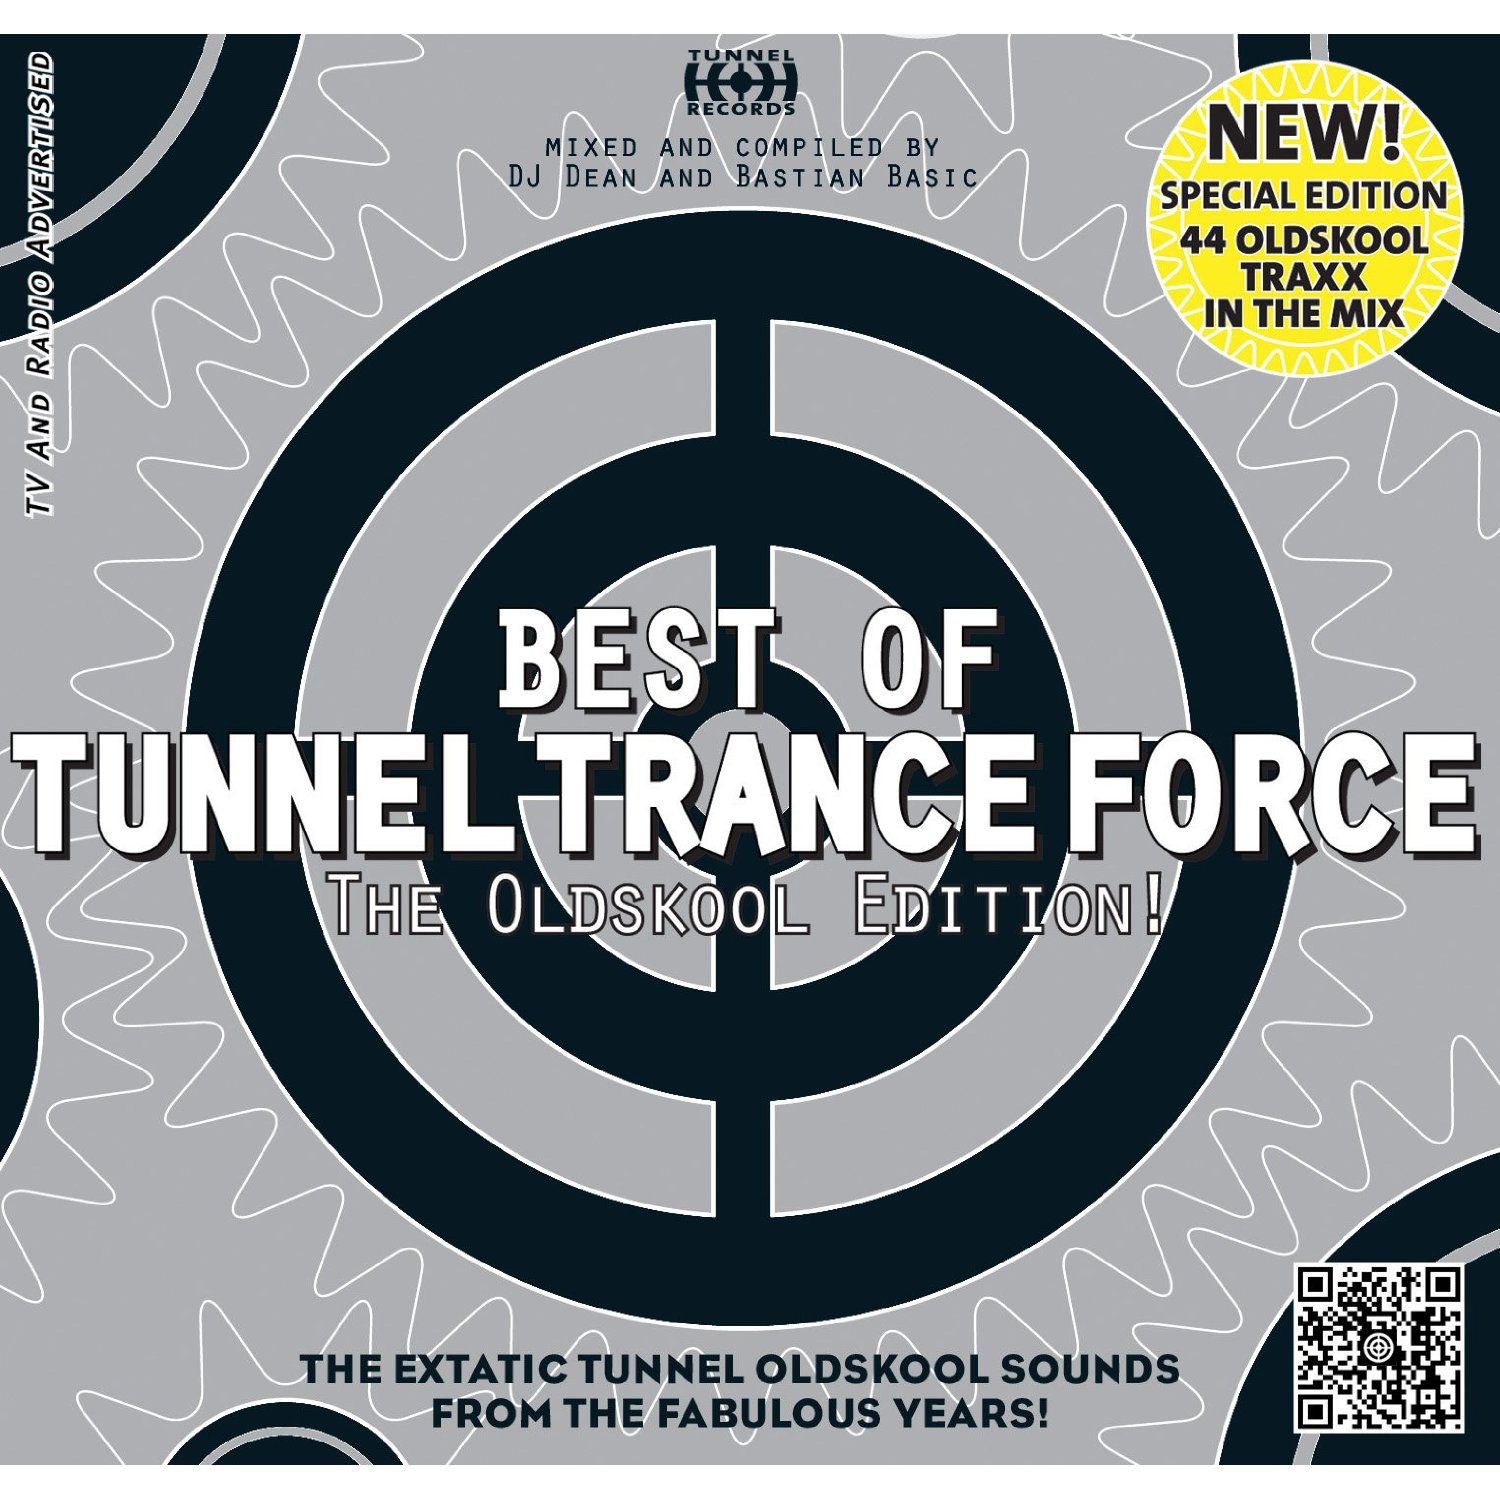 Best Of Tunnel Trance Force - The Oldskool Edition 2012 - Front.jpg